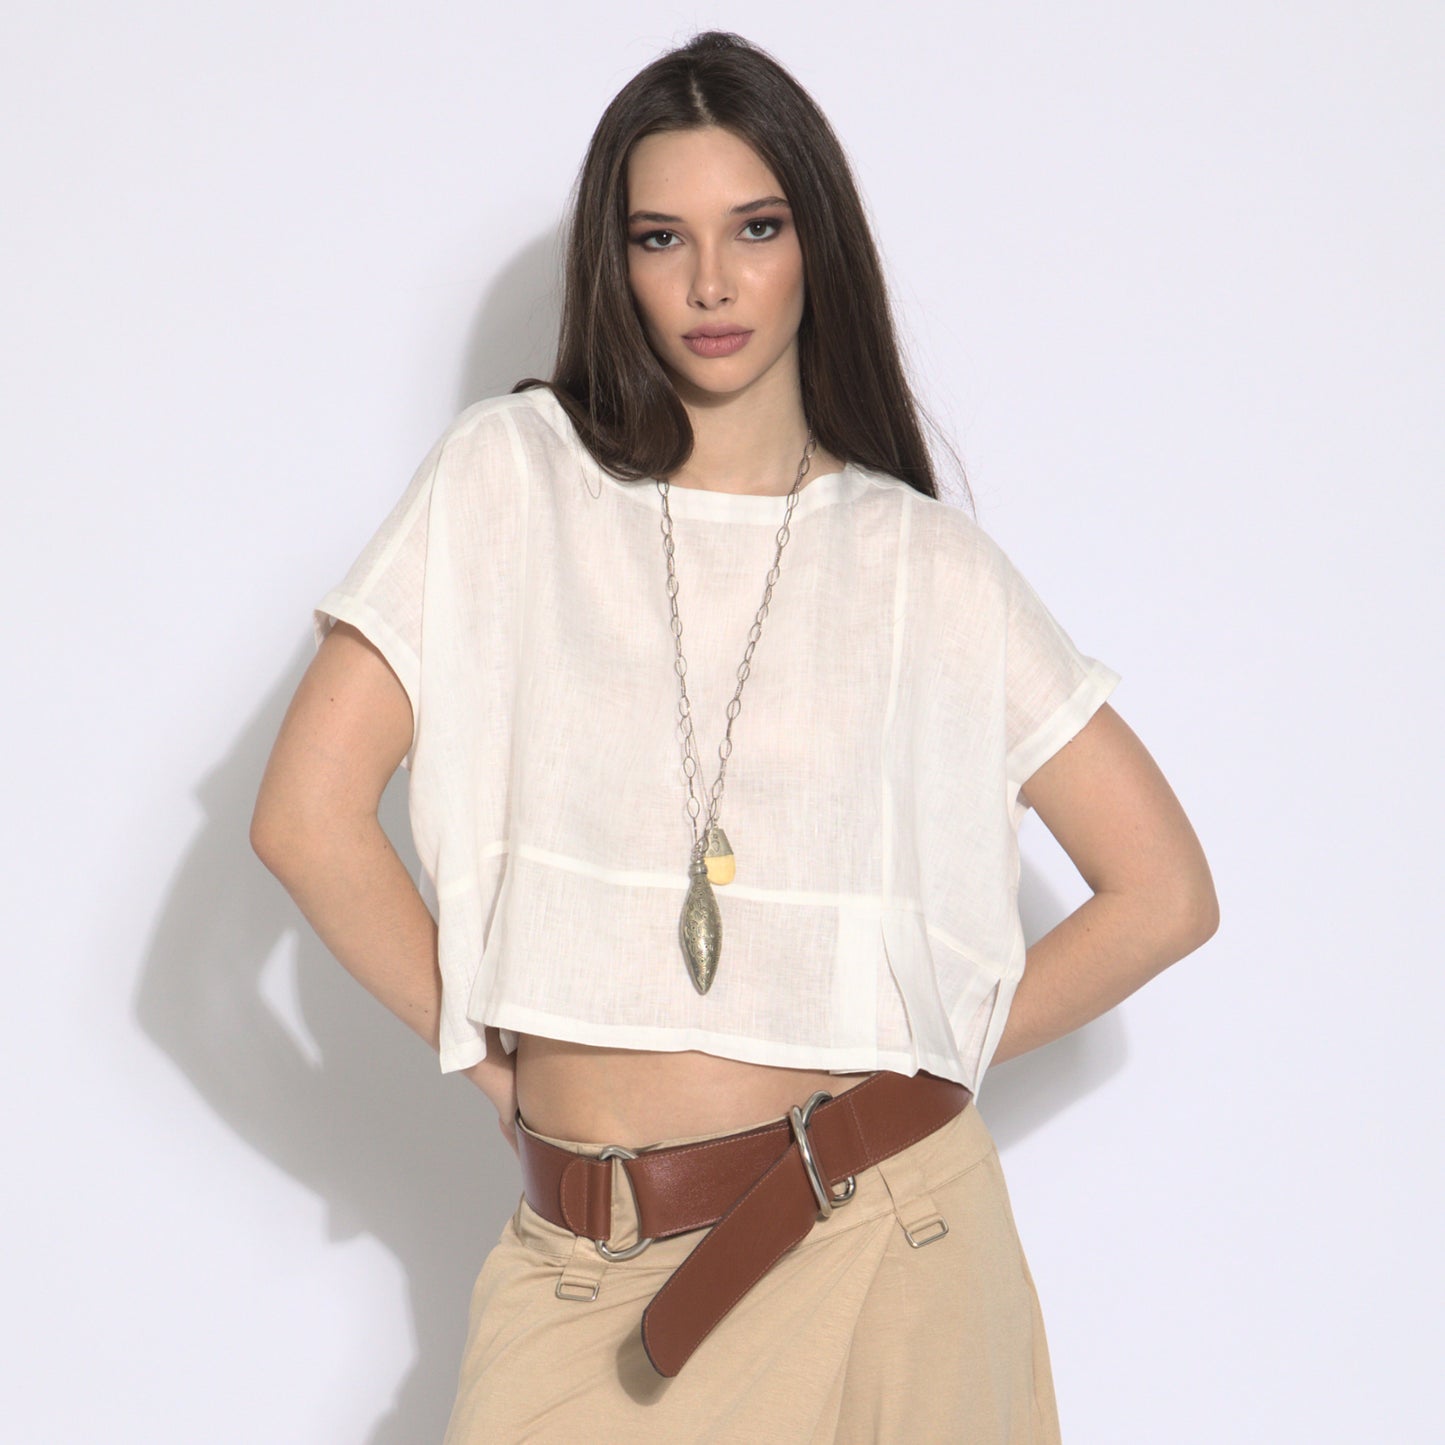 Giulia - Blouse in pure linen, short sleeves